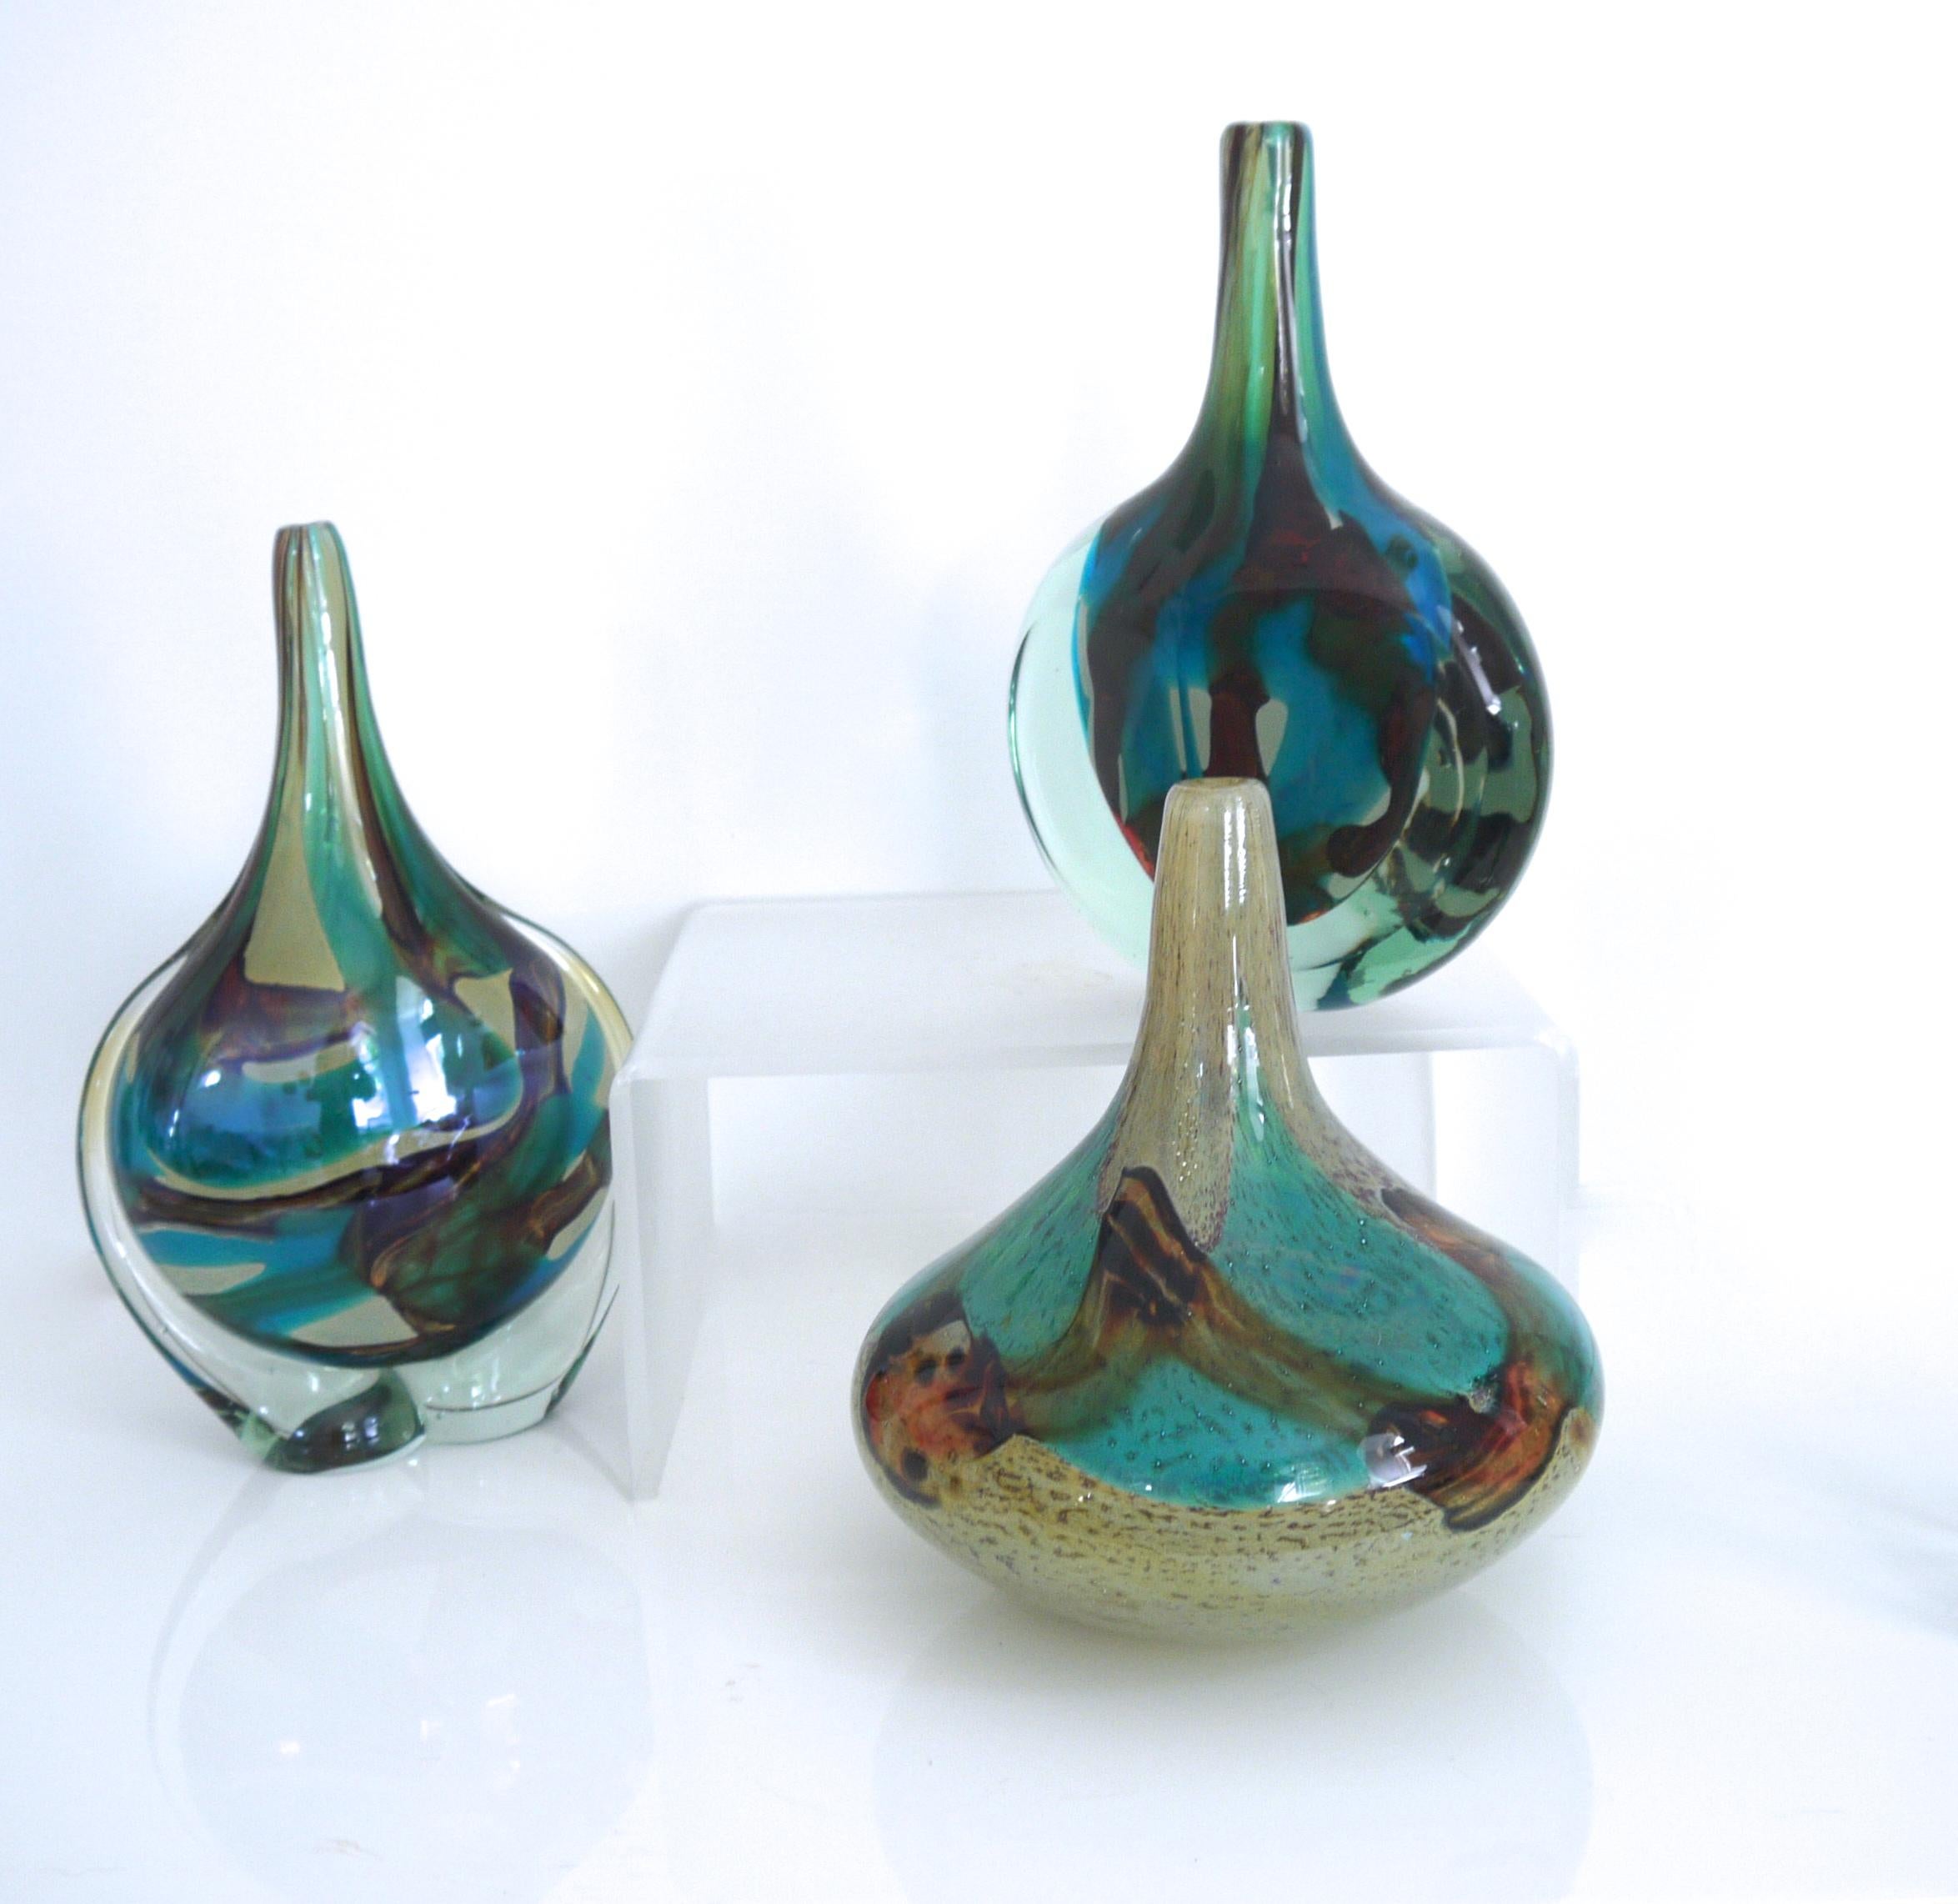 Michael Harris studied glass design during the 1950s at Stourbridge College of Art and at the Royal College of Art (RCA).In 1962 he was appointed Tutor in Industrial Glass at the RCA, where he taught for the next six years, setting up hot-glass